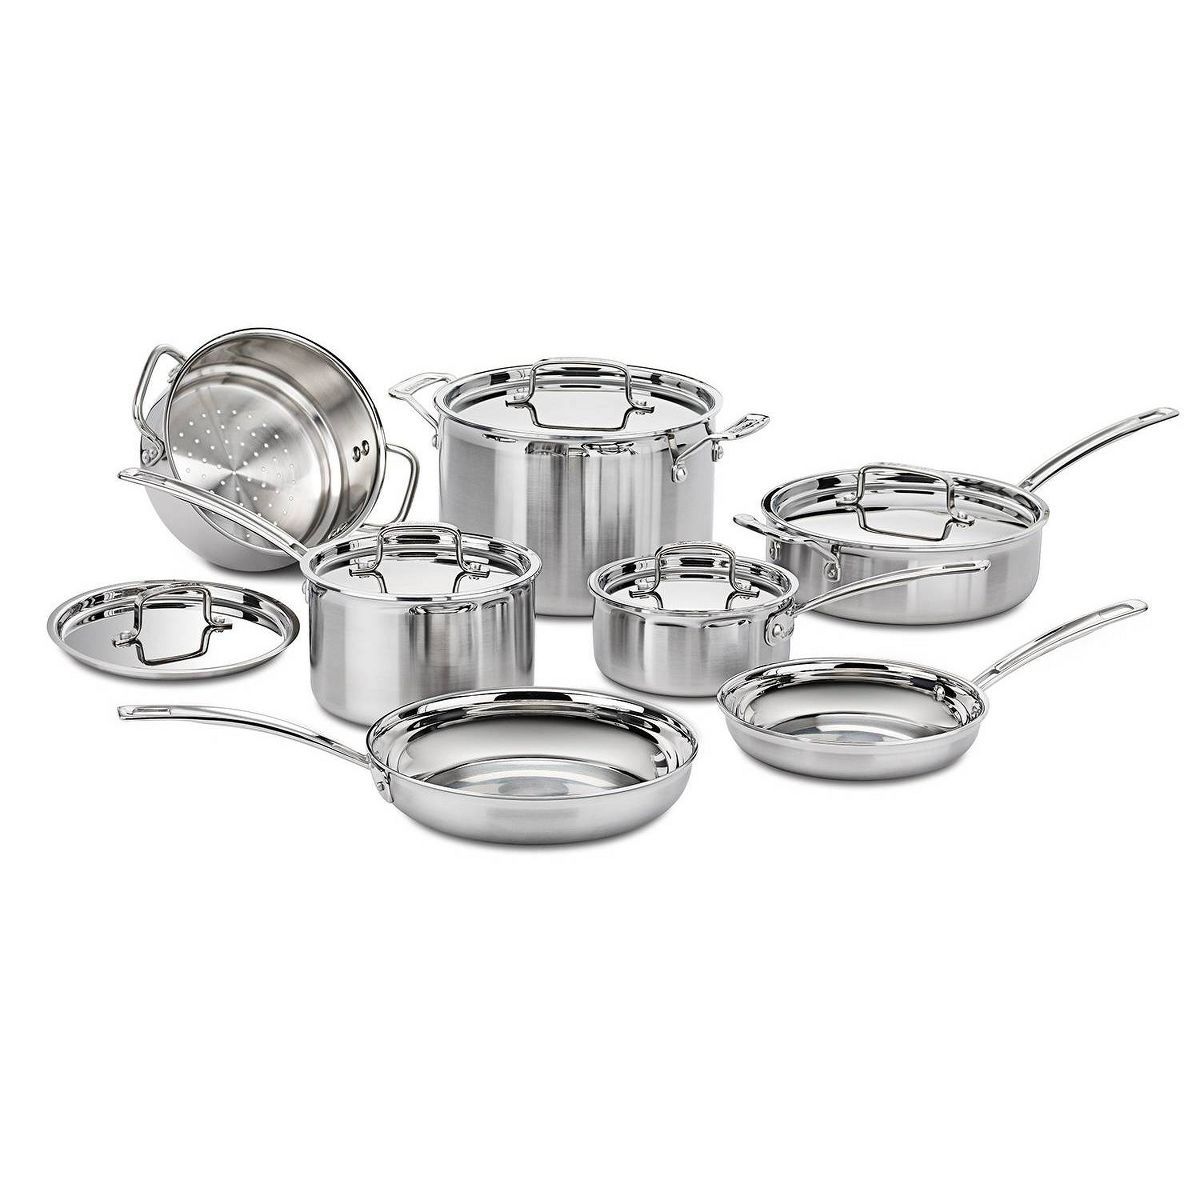 Cuisinart Multiclad Pro 12pc Tri-Ply Stainless Steel Cookware Set - MCP-12N | Target